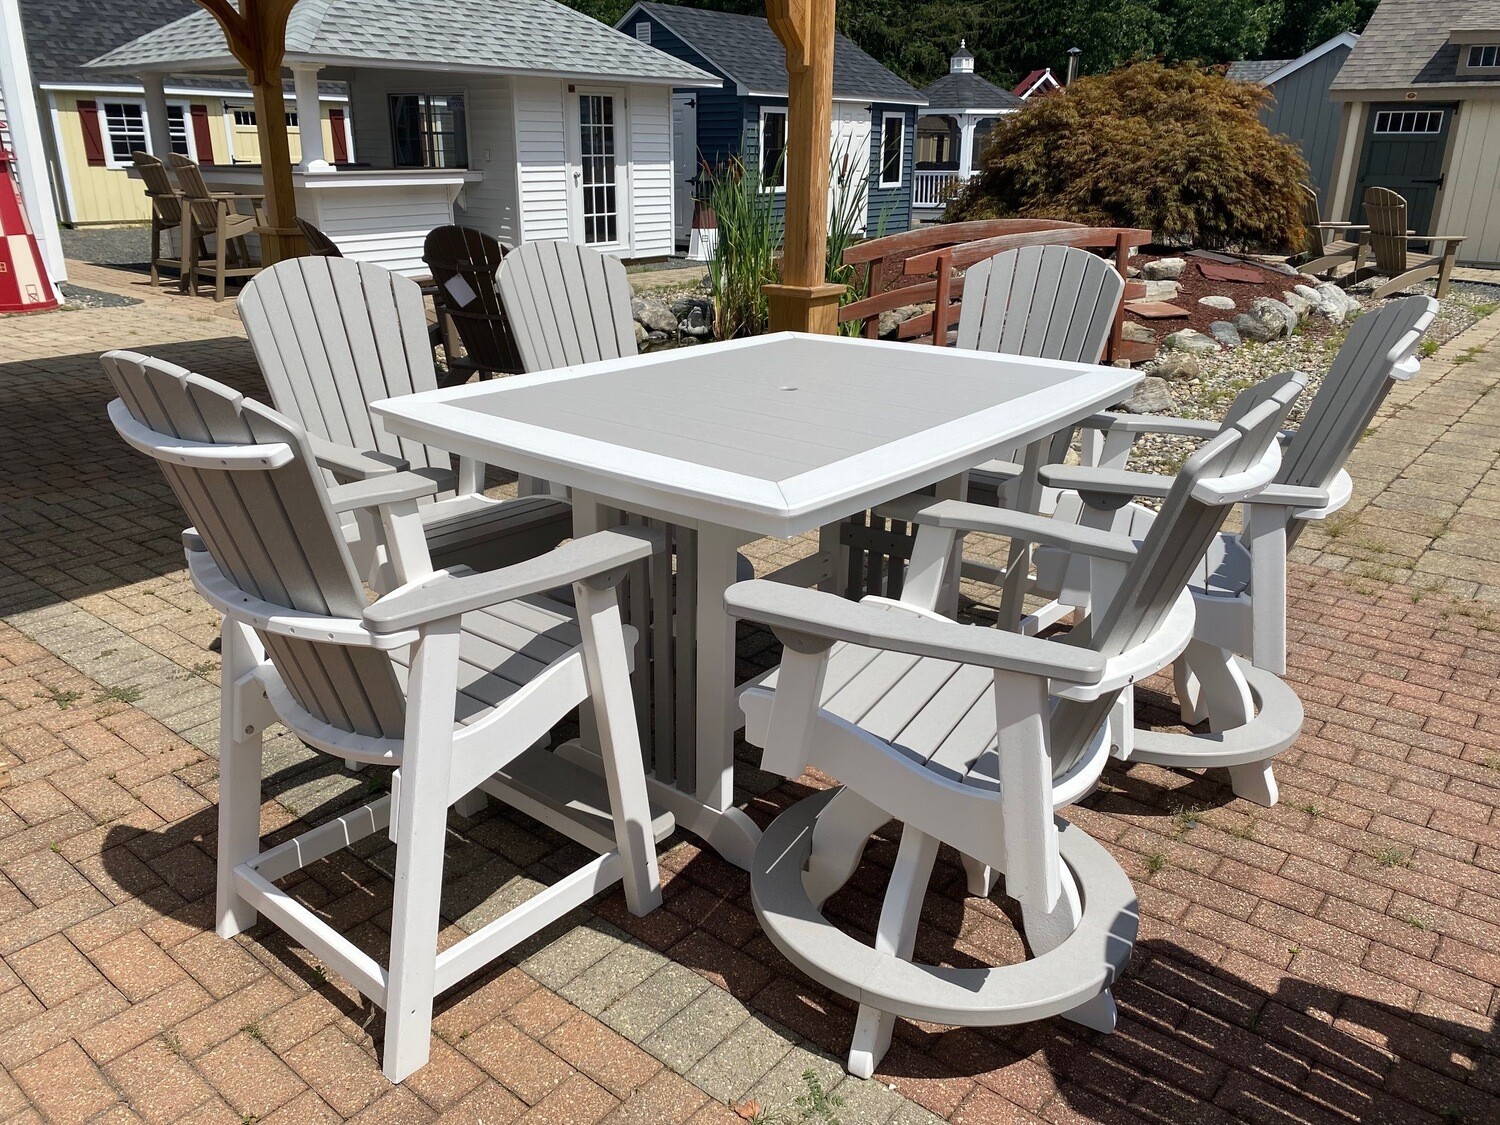 Poly Supreme ​Patio Set, with (1) 45” x 60” Mission table and (6) chairs